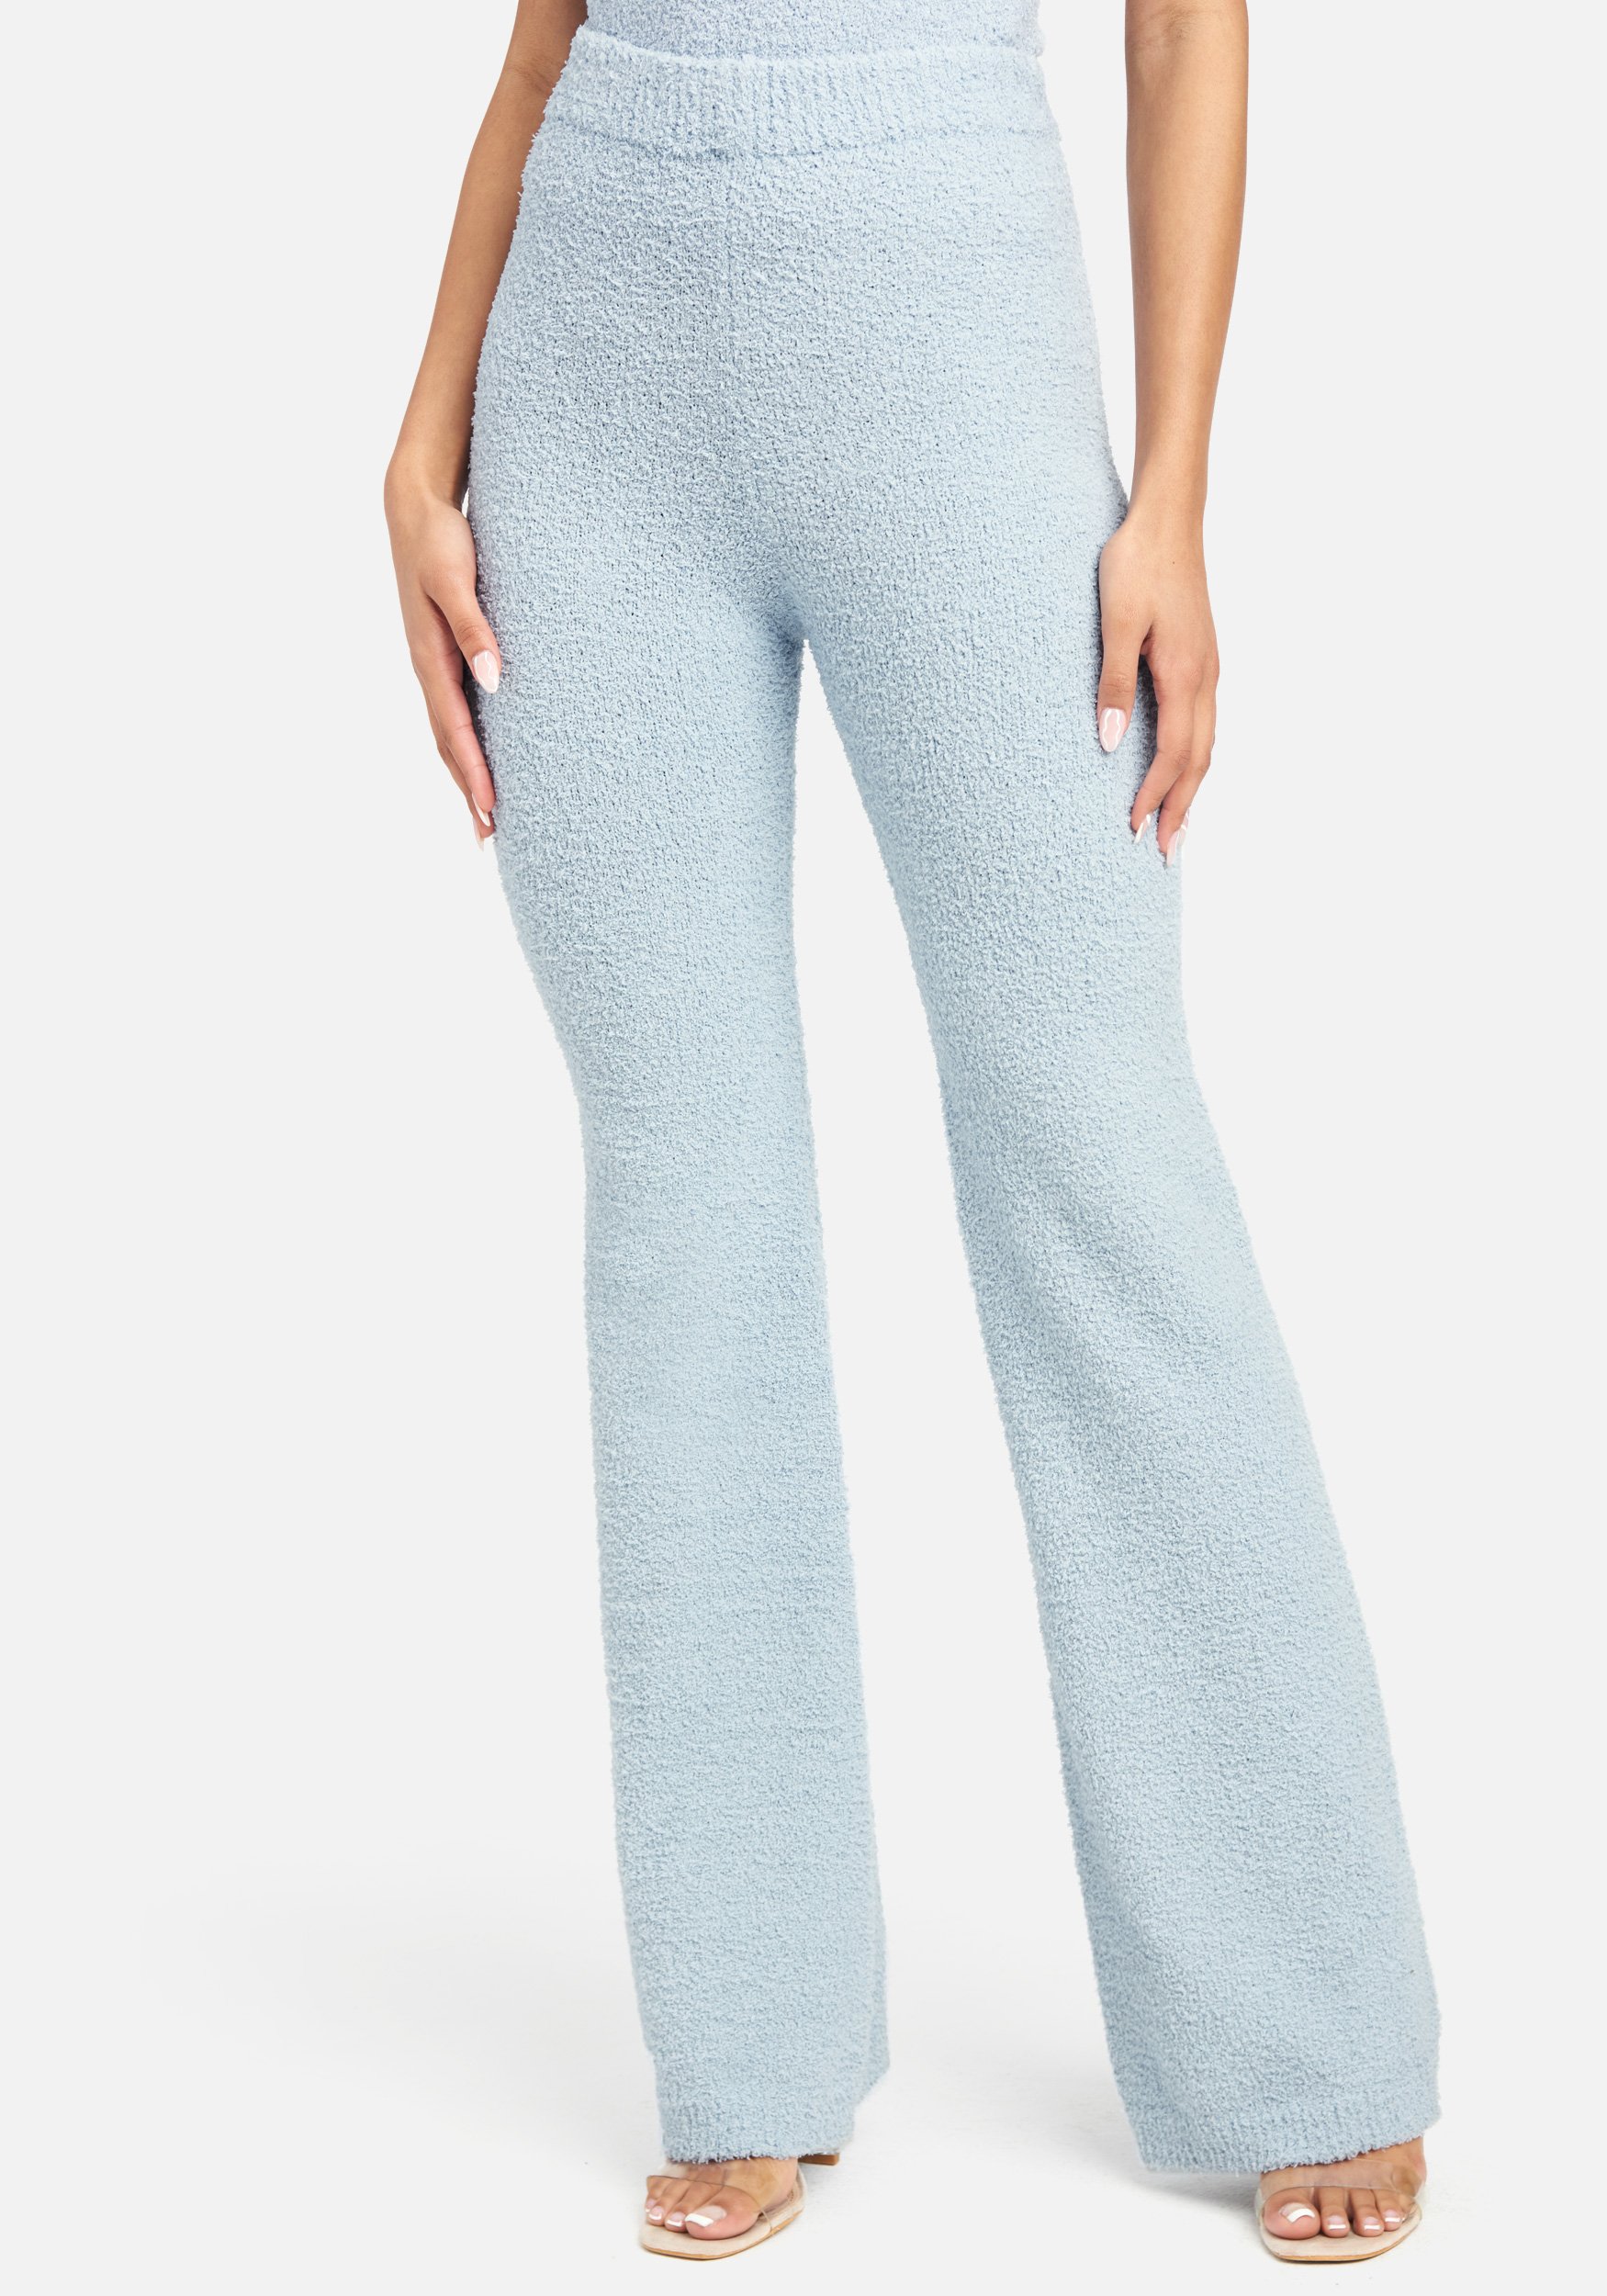 Bebe Women's Chenille Knit Pant, Size Small in Ice Blue Polyester